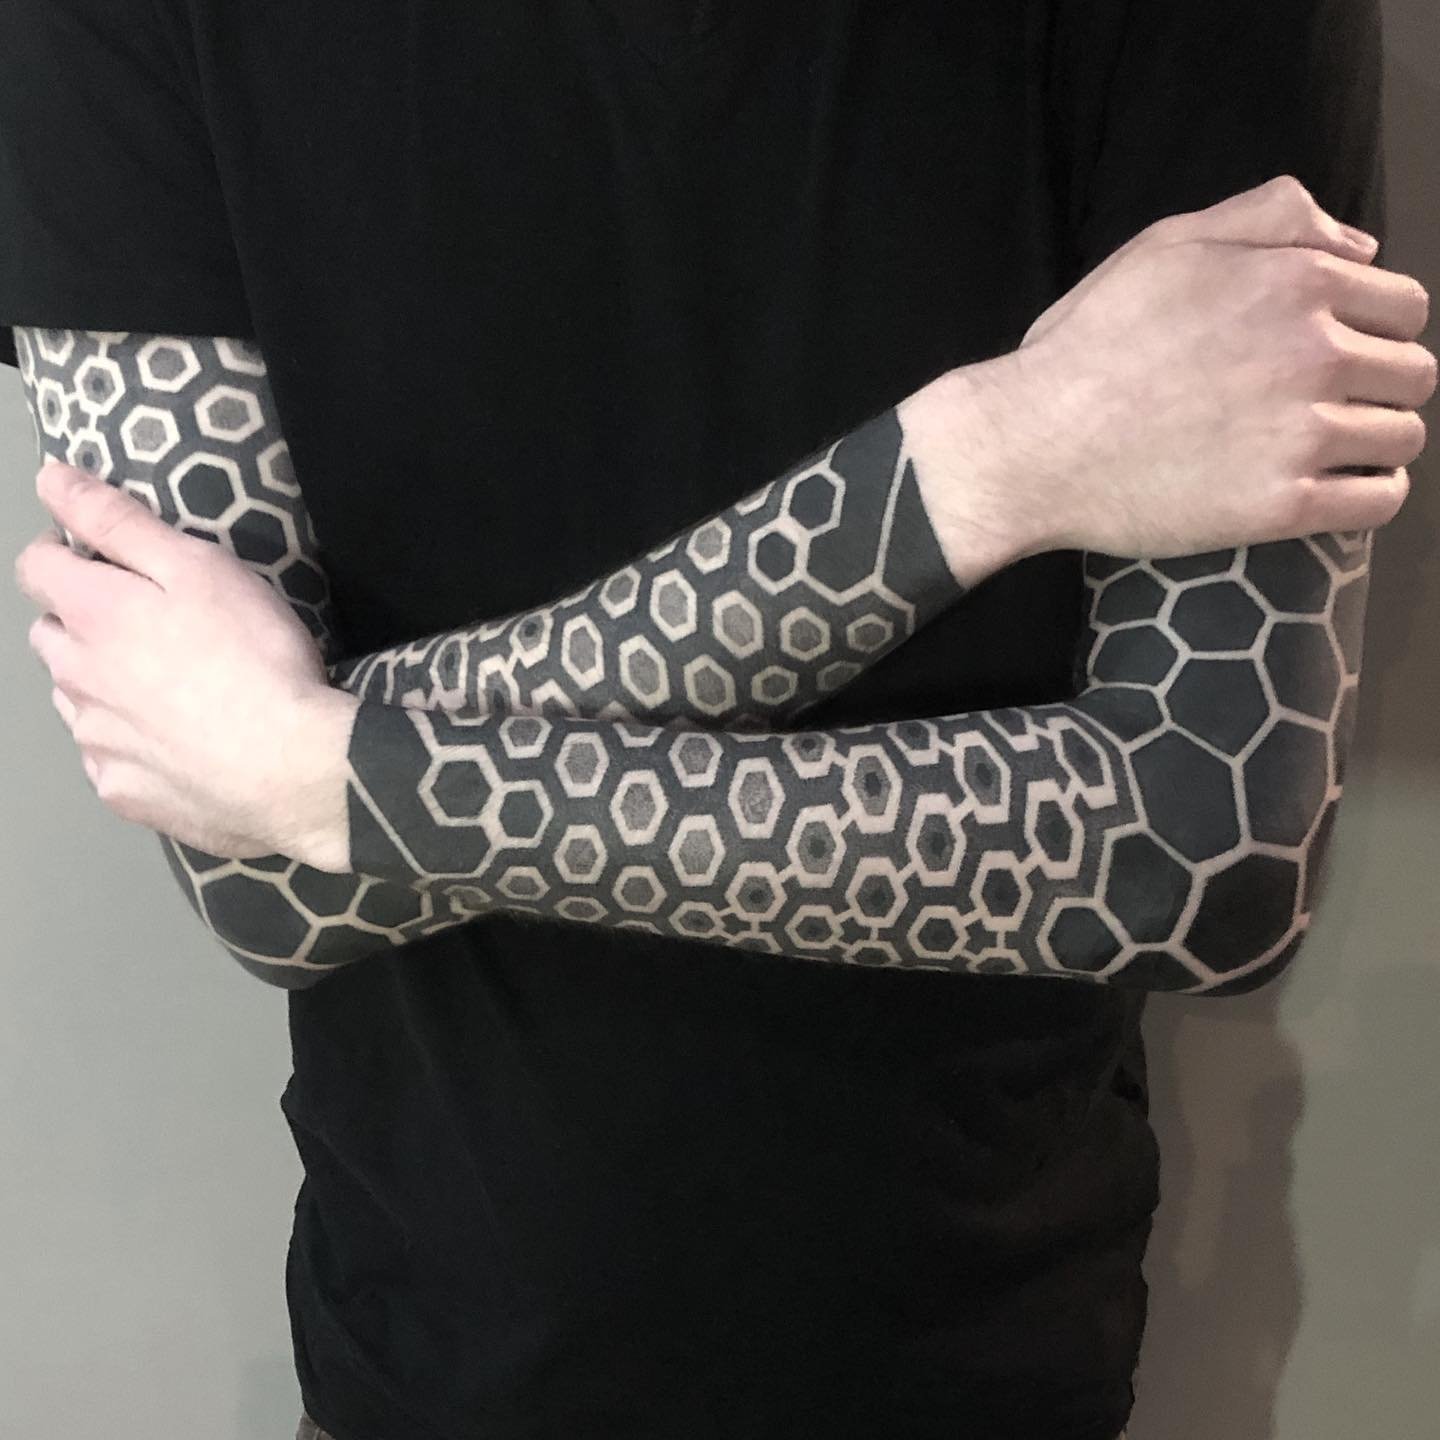 Double sleeves for projectinkslut 👊.
I still have space available, if you would like to get tattooed.

For bookings/info please email ✉️arcane.seth@gmail.com
&bull;
&bull;
#geometrictattoo #geometricdesign #dotworktattoo #dotworkers #dotwork #dotwor